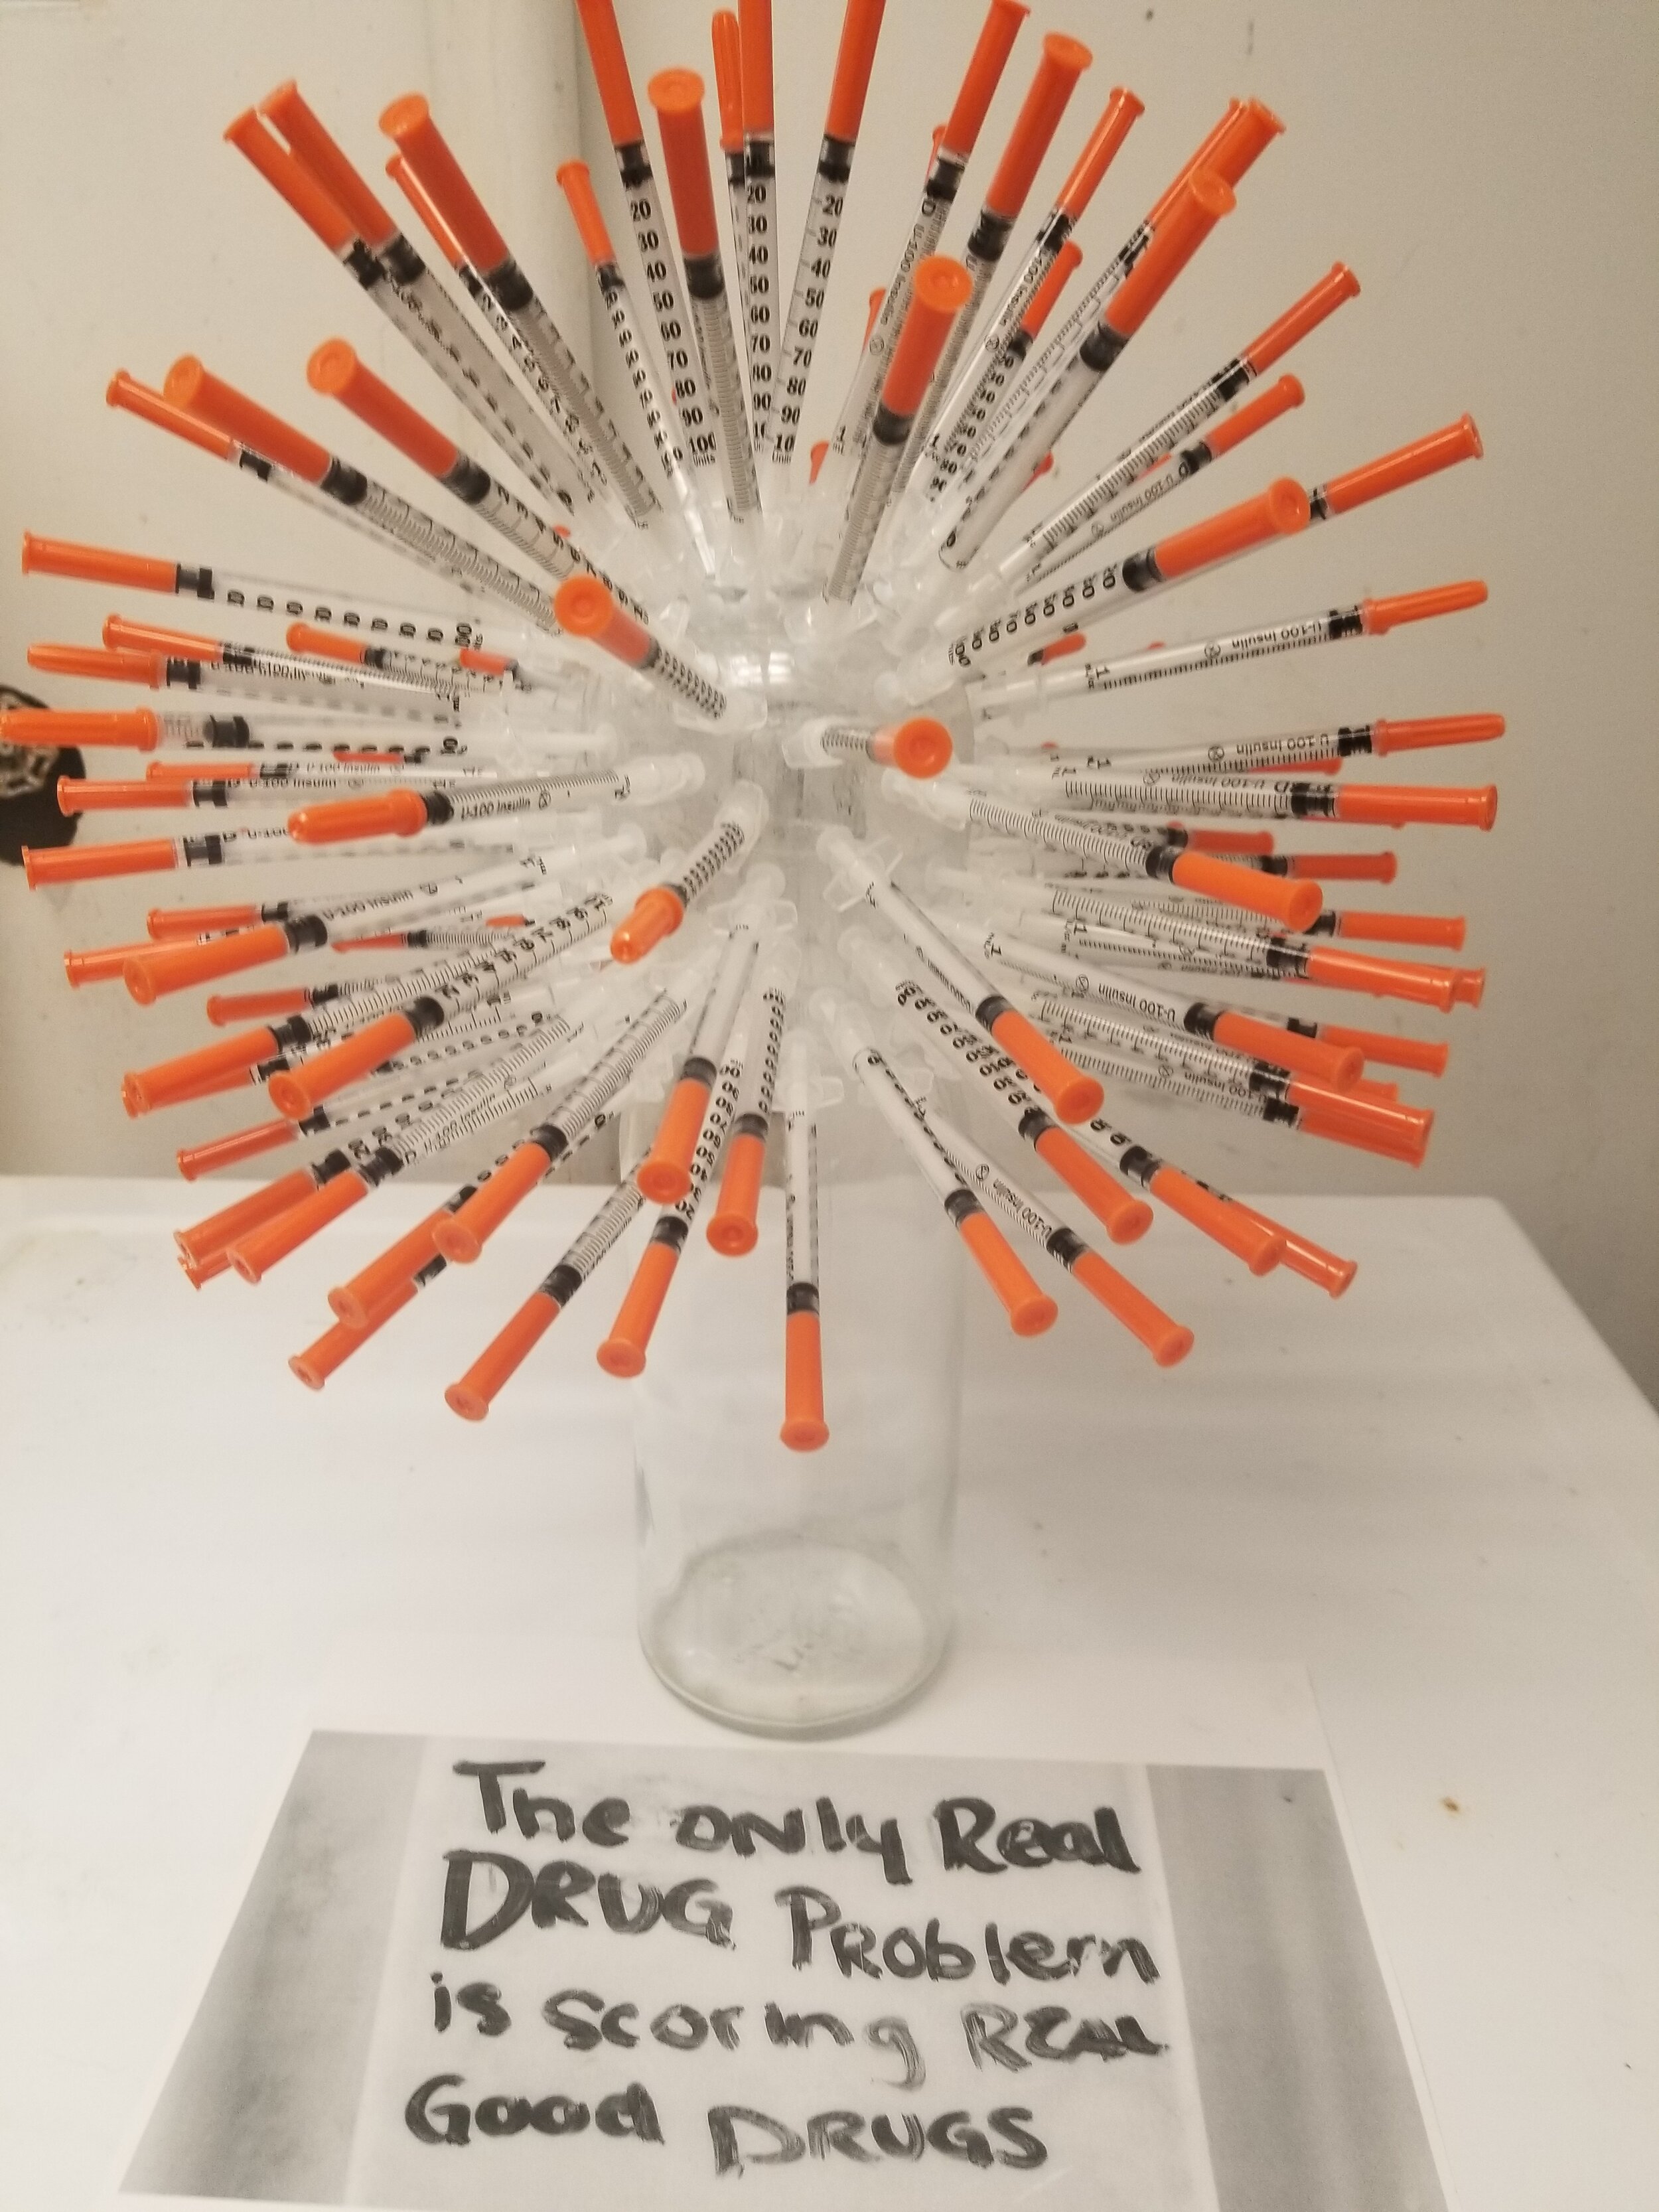 "Needles: The Real Drug Problem"